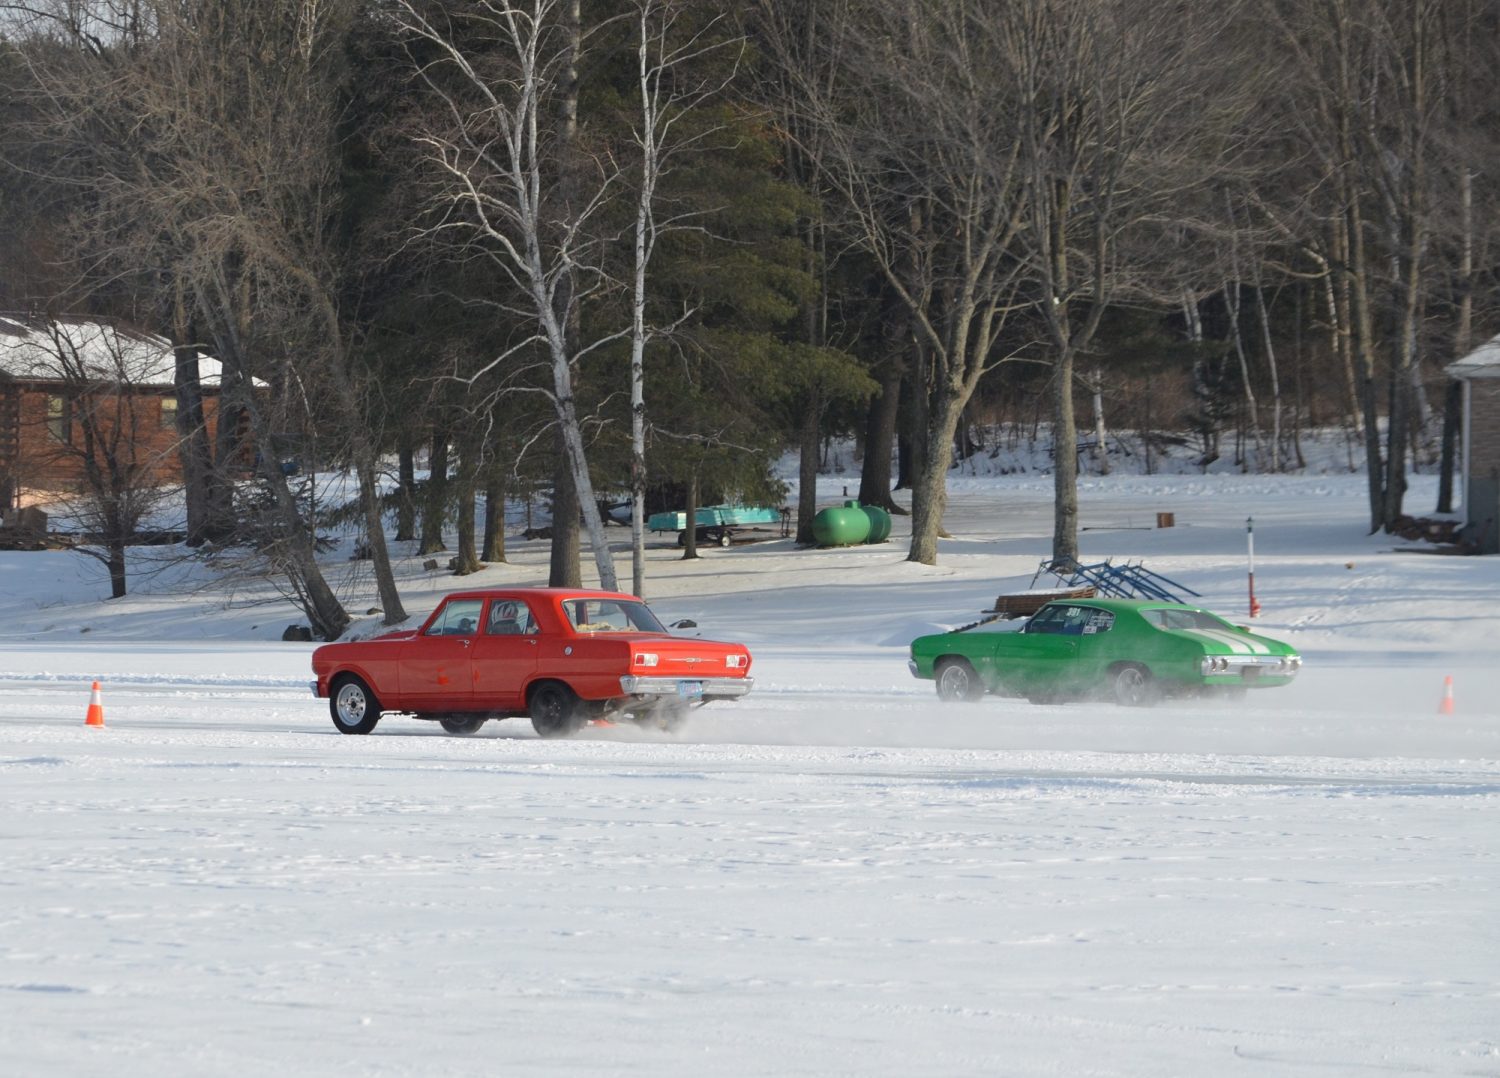 Merrill Ice Drag races a tourism event